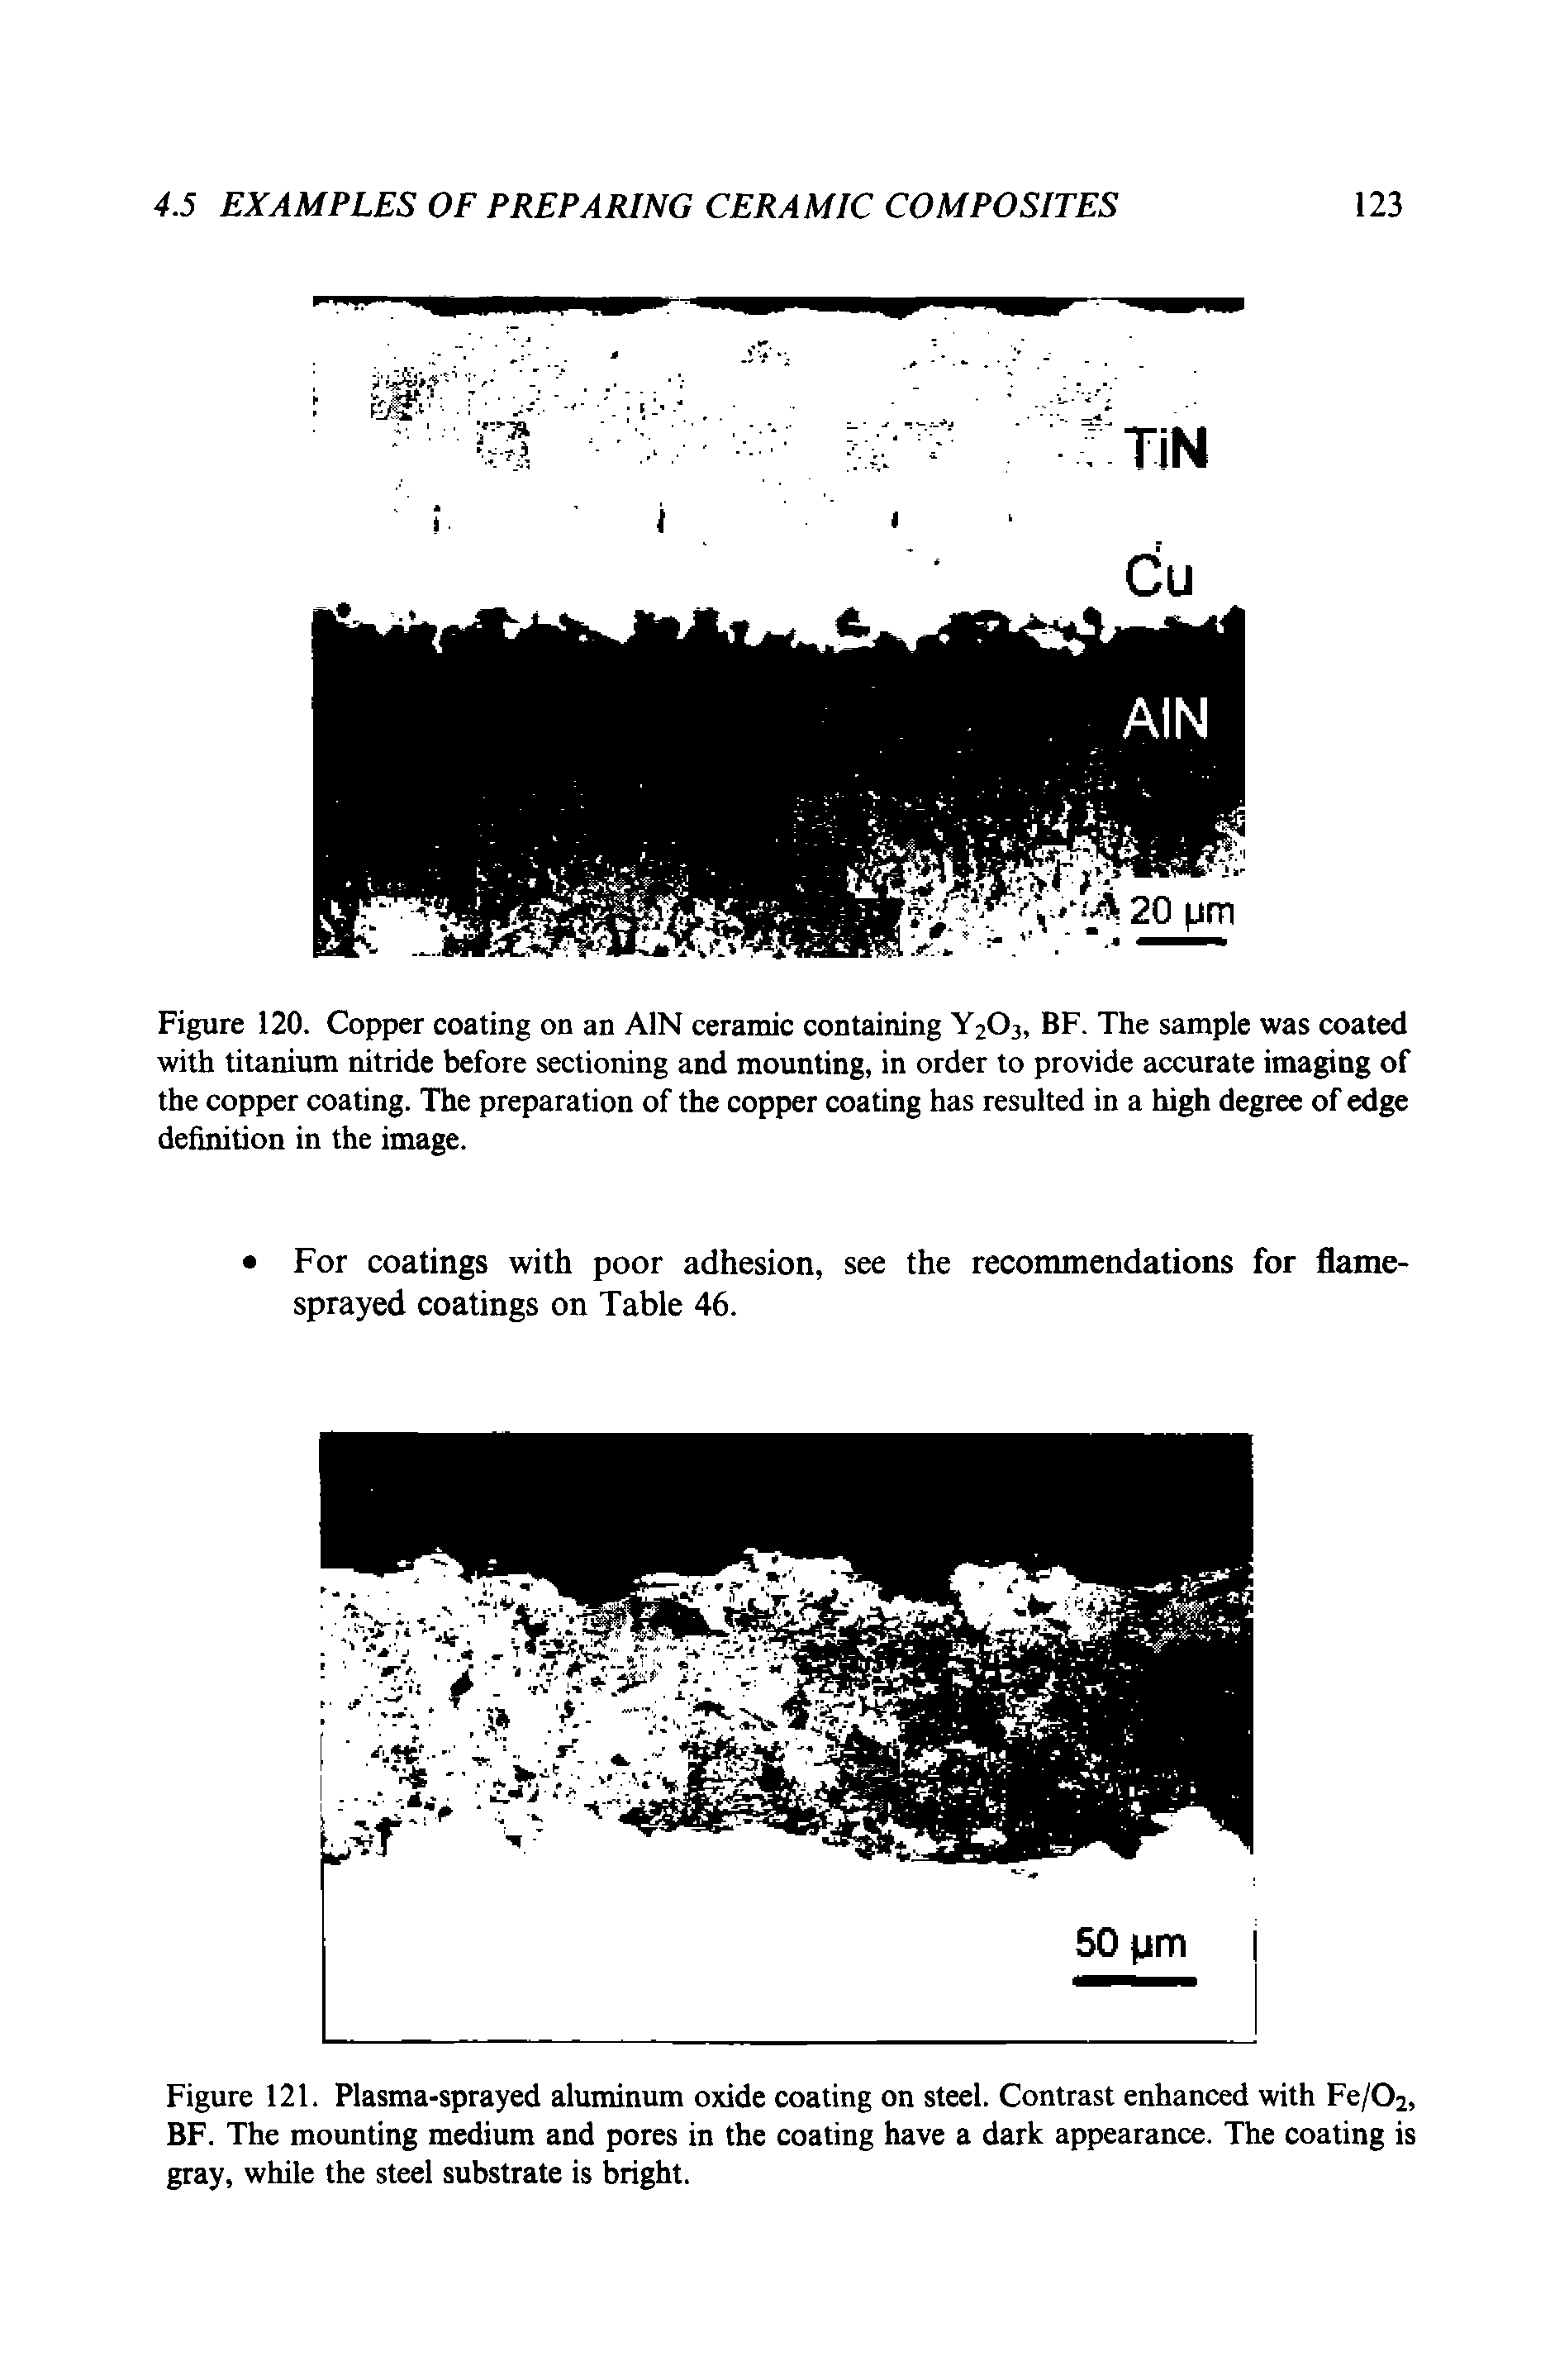 Figure 121. Plasma-sprayed aluminum oxide coating on steel. Contrast enhanced with Fe/Oj, BF. The mounting medium and pores in the coating have a dark appearance. The coating is gray, while the steel substrate is bright.